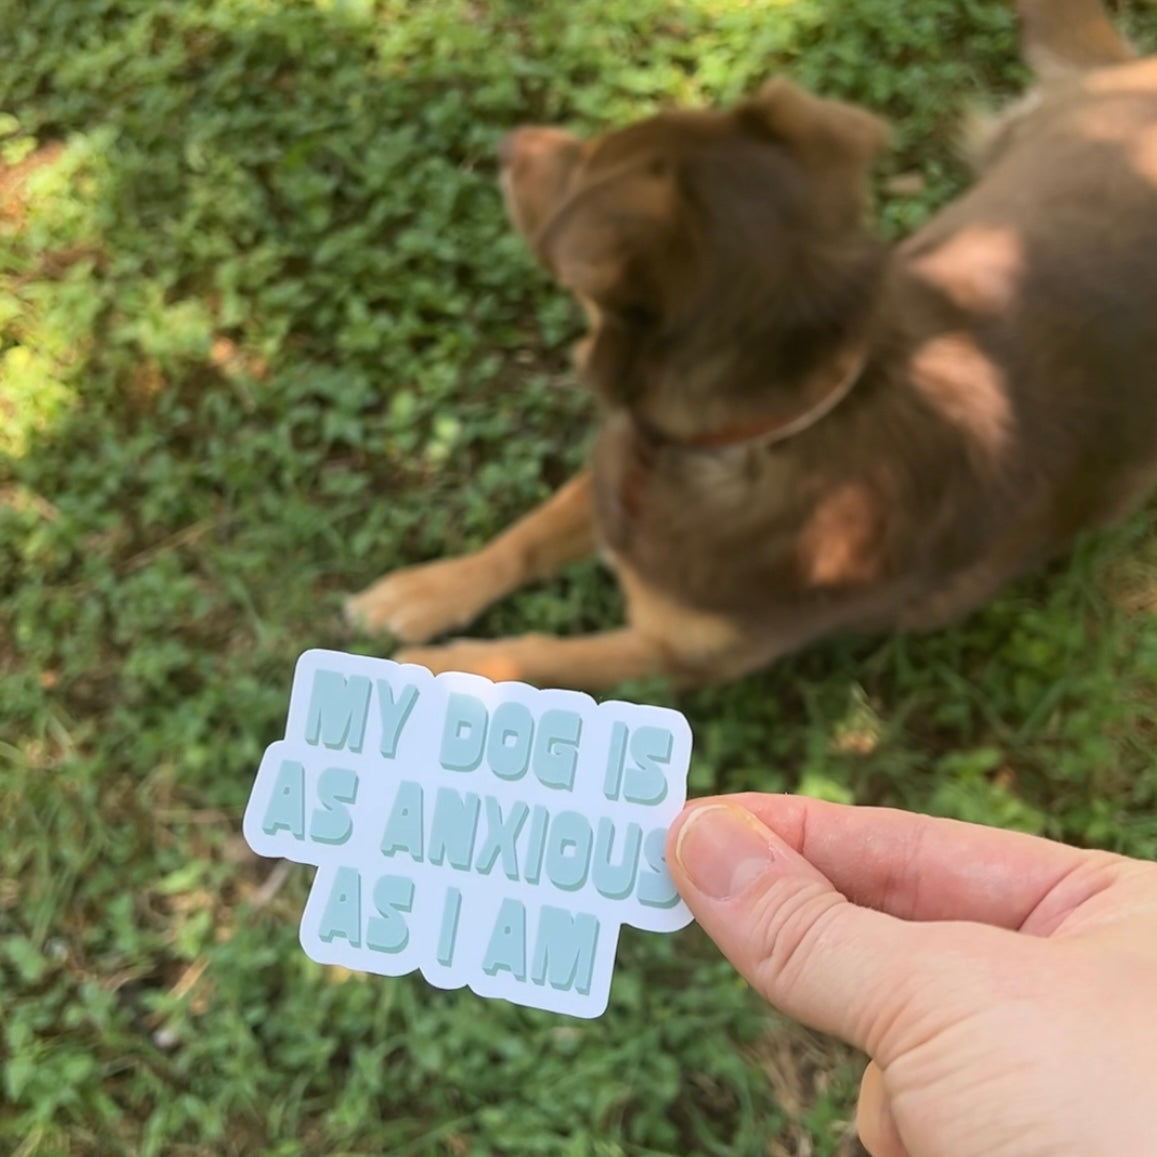 Sticker saying "My Dog is As Anxious as I am" next to a small brown dog